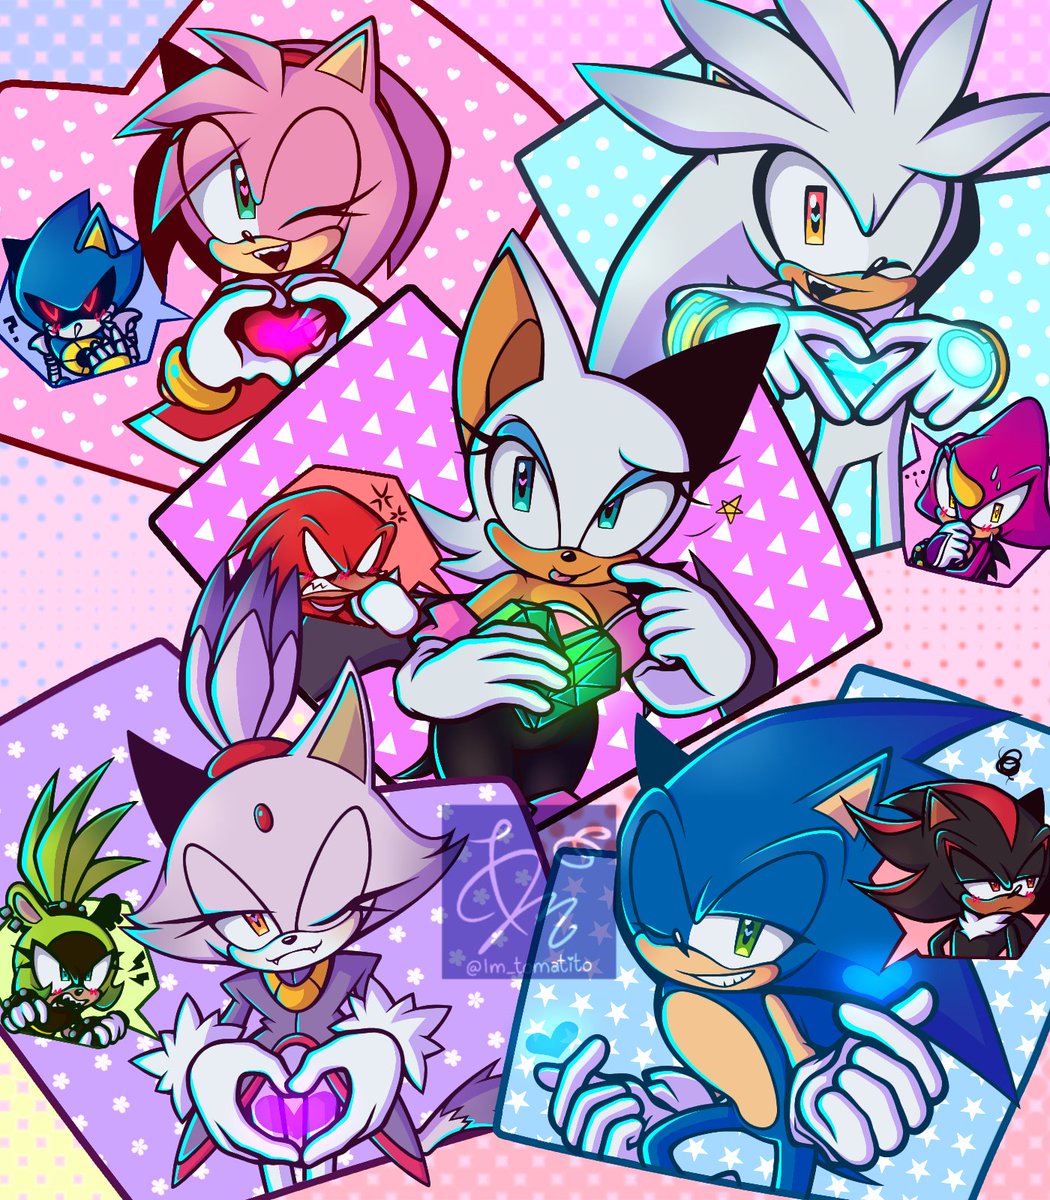 Battle of hearts!✨ Just wanted to draw my favorite ships together, they all make me happy♡

#metamy #espilver #silvespio #knuxouge #surgaze #blazurge #sonadow